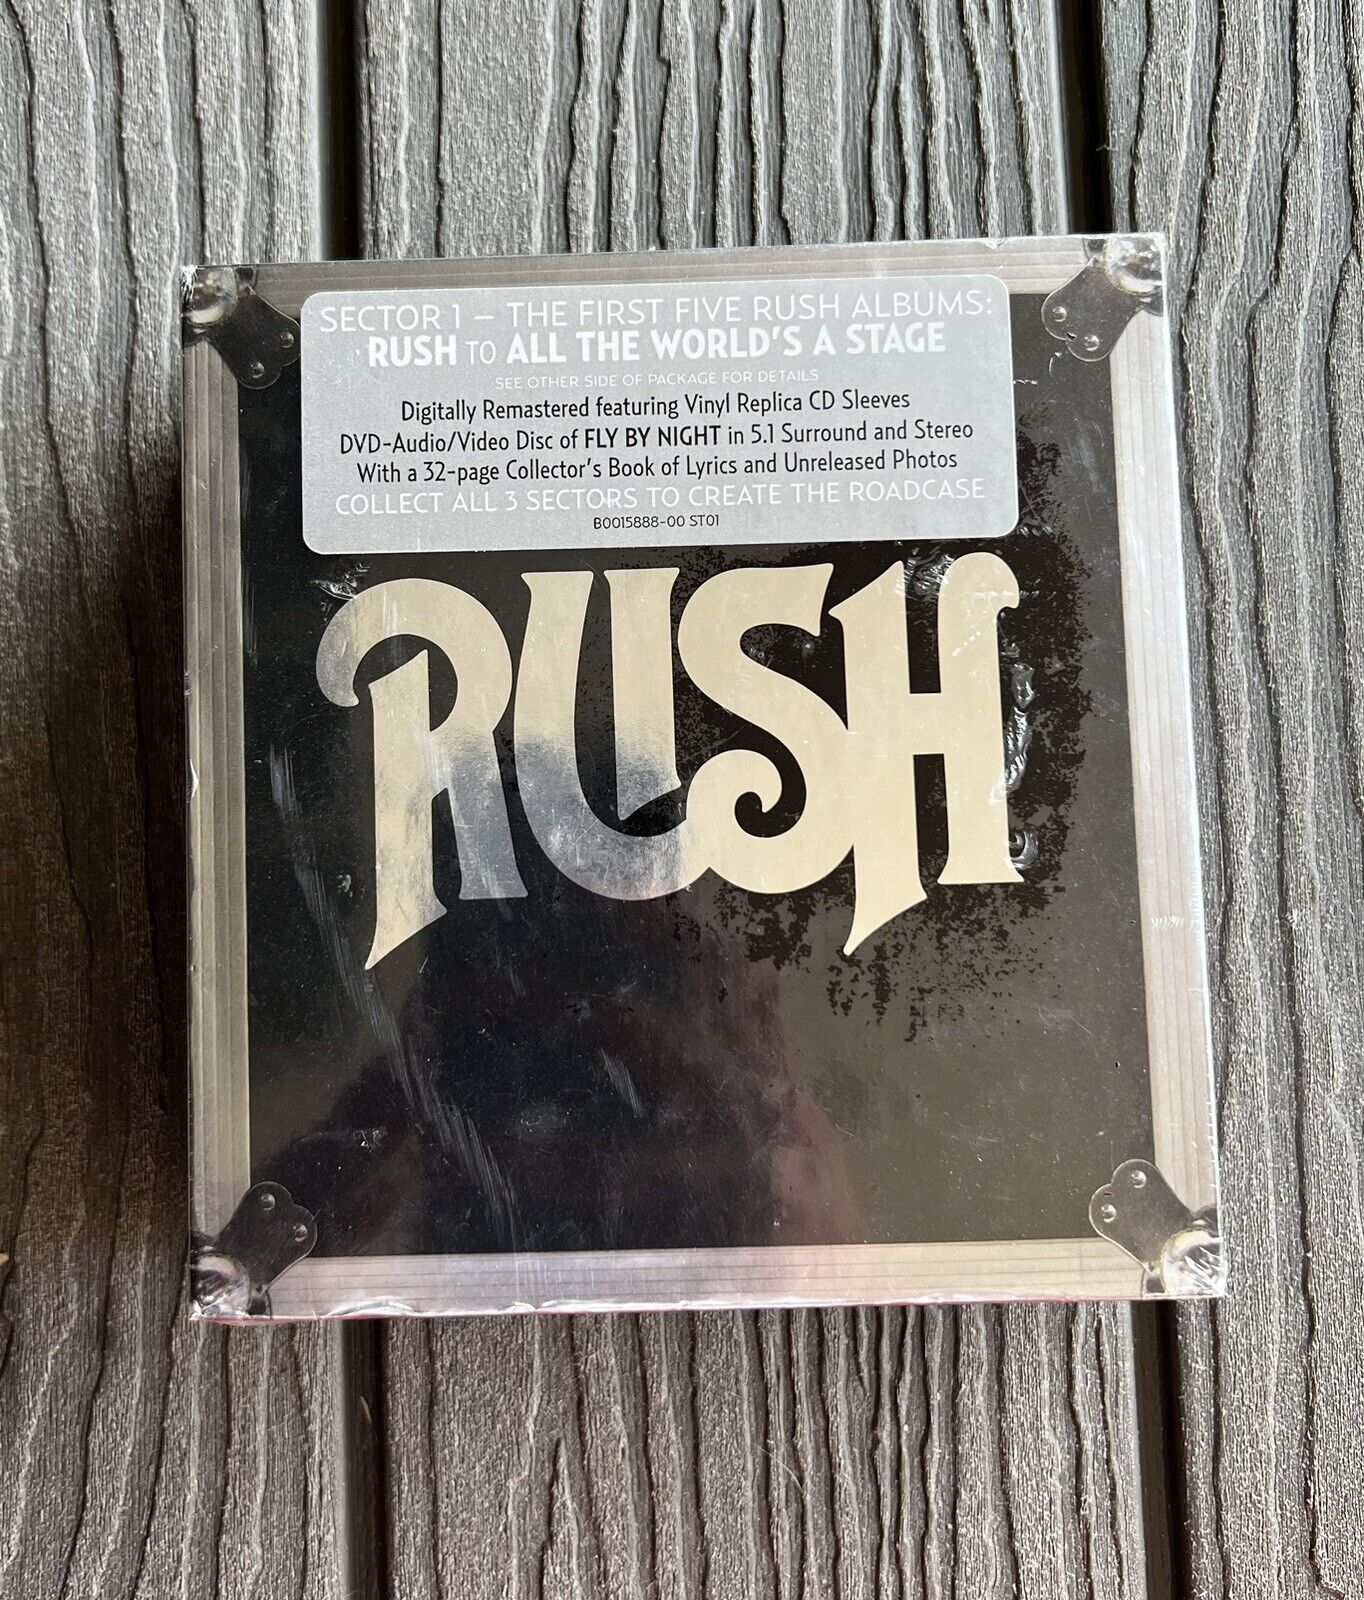 SECTOR 1 - RUSH - 5CD  1DVD BOX-SET - w/ Fly By Night in 5.1 Surround;New Seald